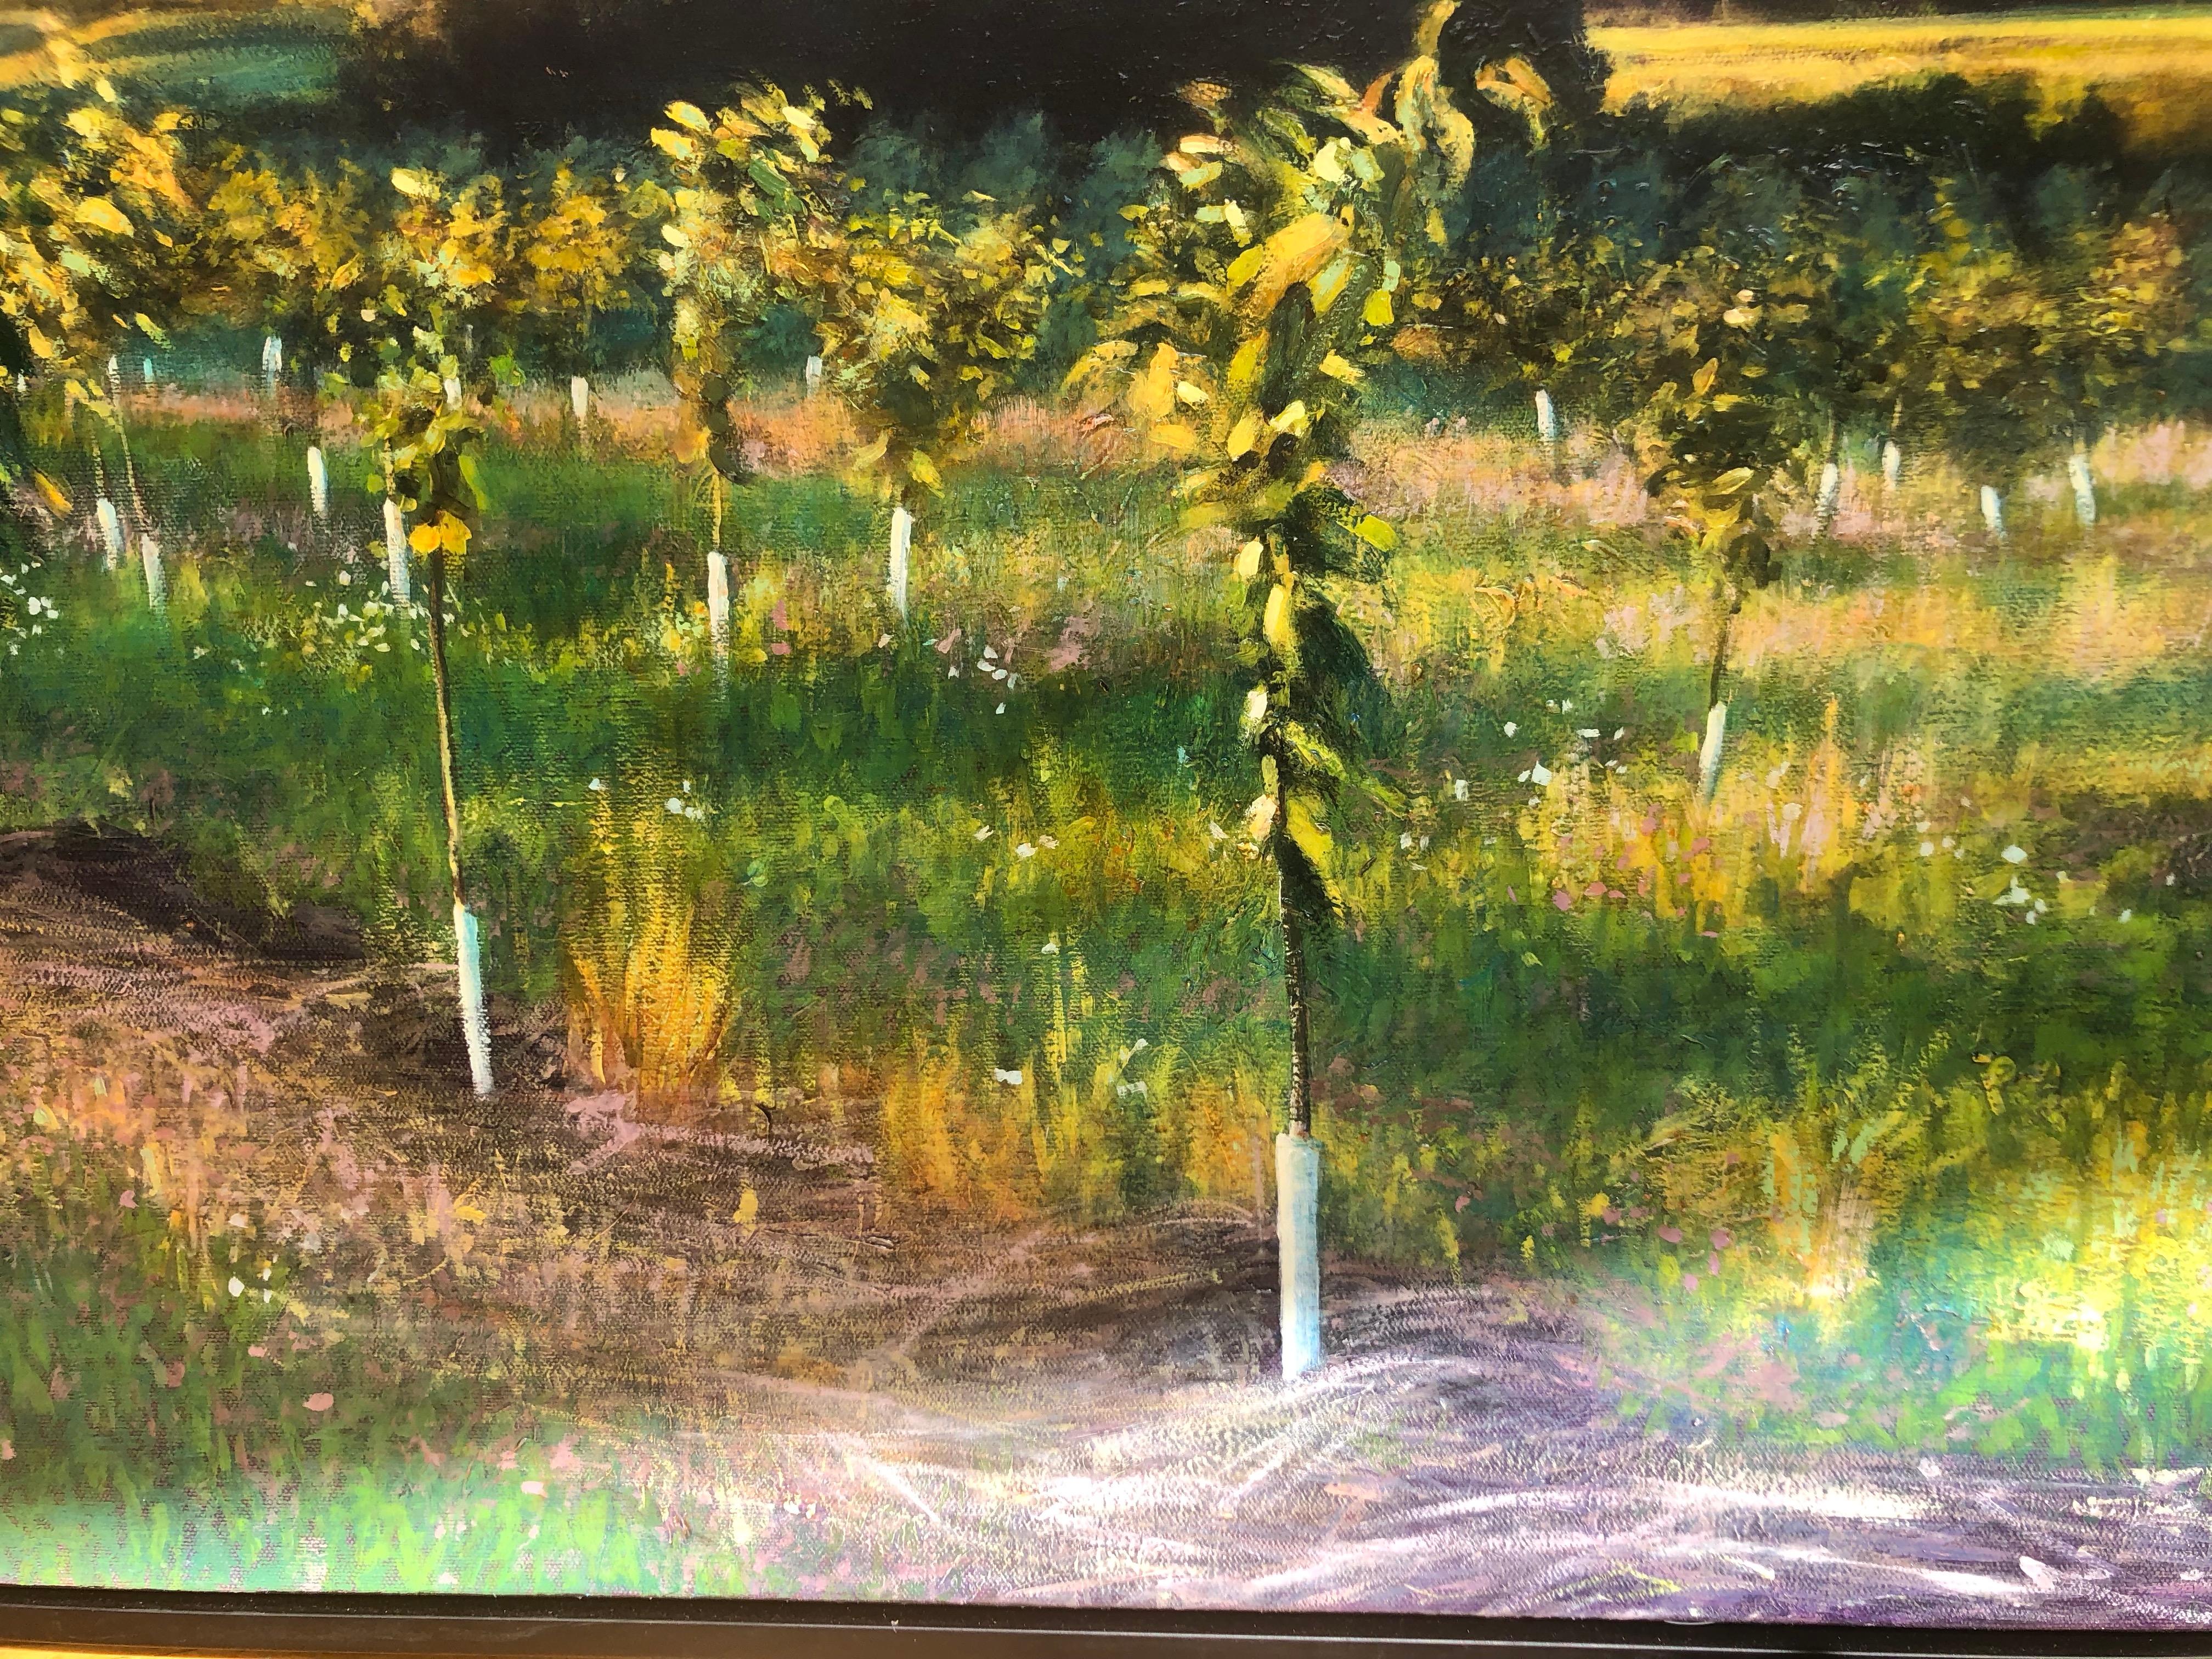 Orchard Path - Original Oil Painting of Orchard and Hills Bathed in Spring Light 5